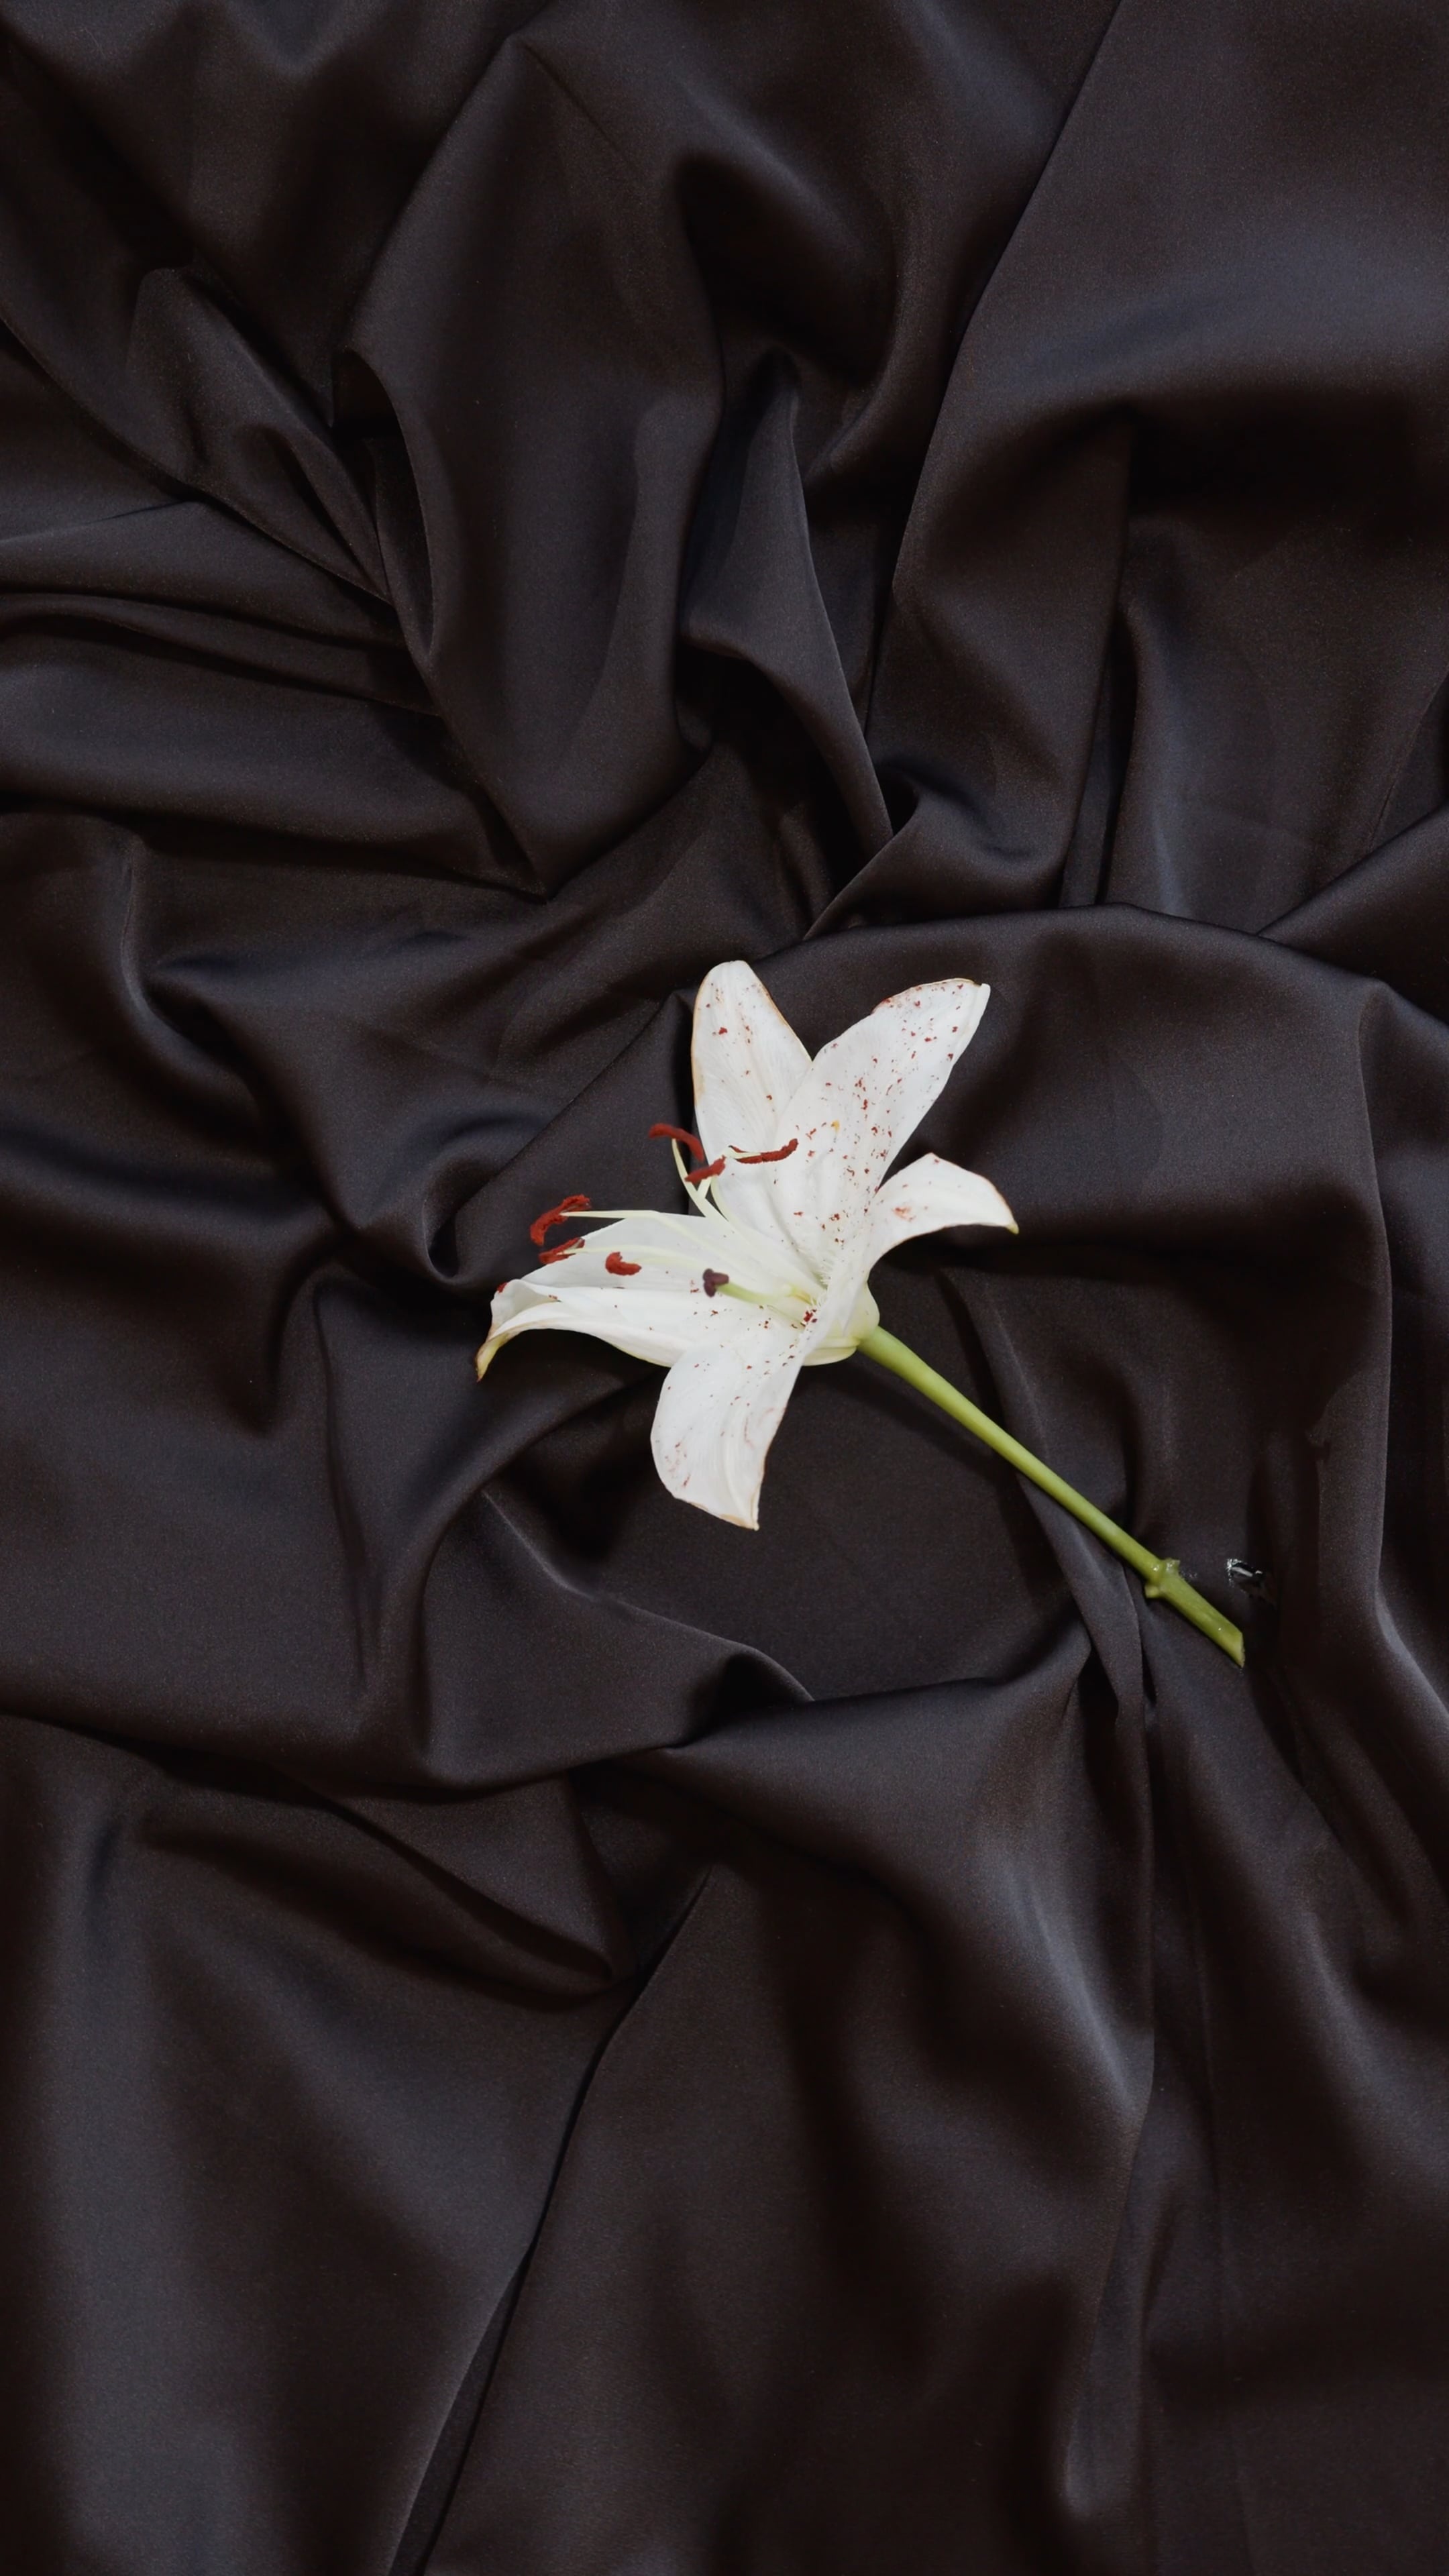 Flower on black fabric, Contrast and beauty, Dramatic background, Captivating imagery, 2160x3840 4K Handy